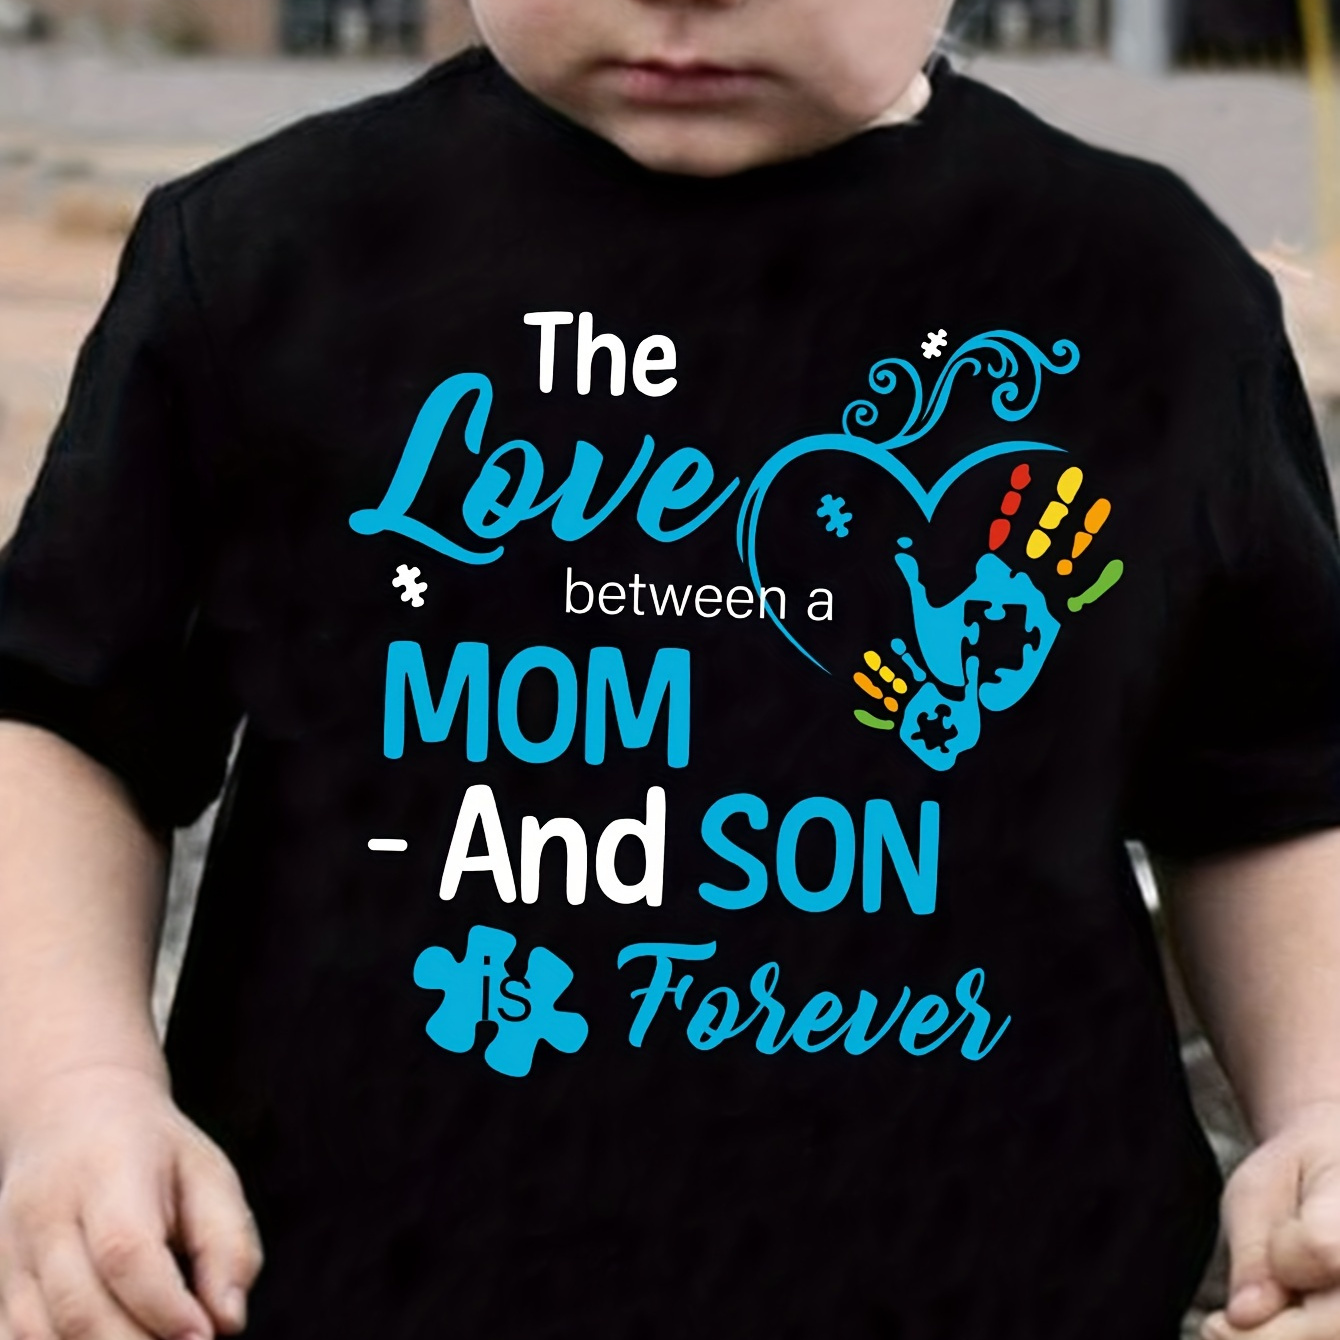 

The Love Between Mom And Son Letter Print Boys Meaningful T-shirt, Cool, Versatile & Smart Short Sleeve Tee, Gift Idea